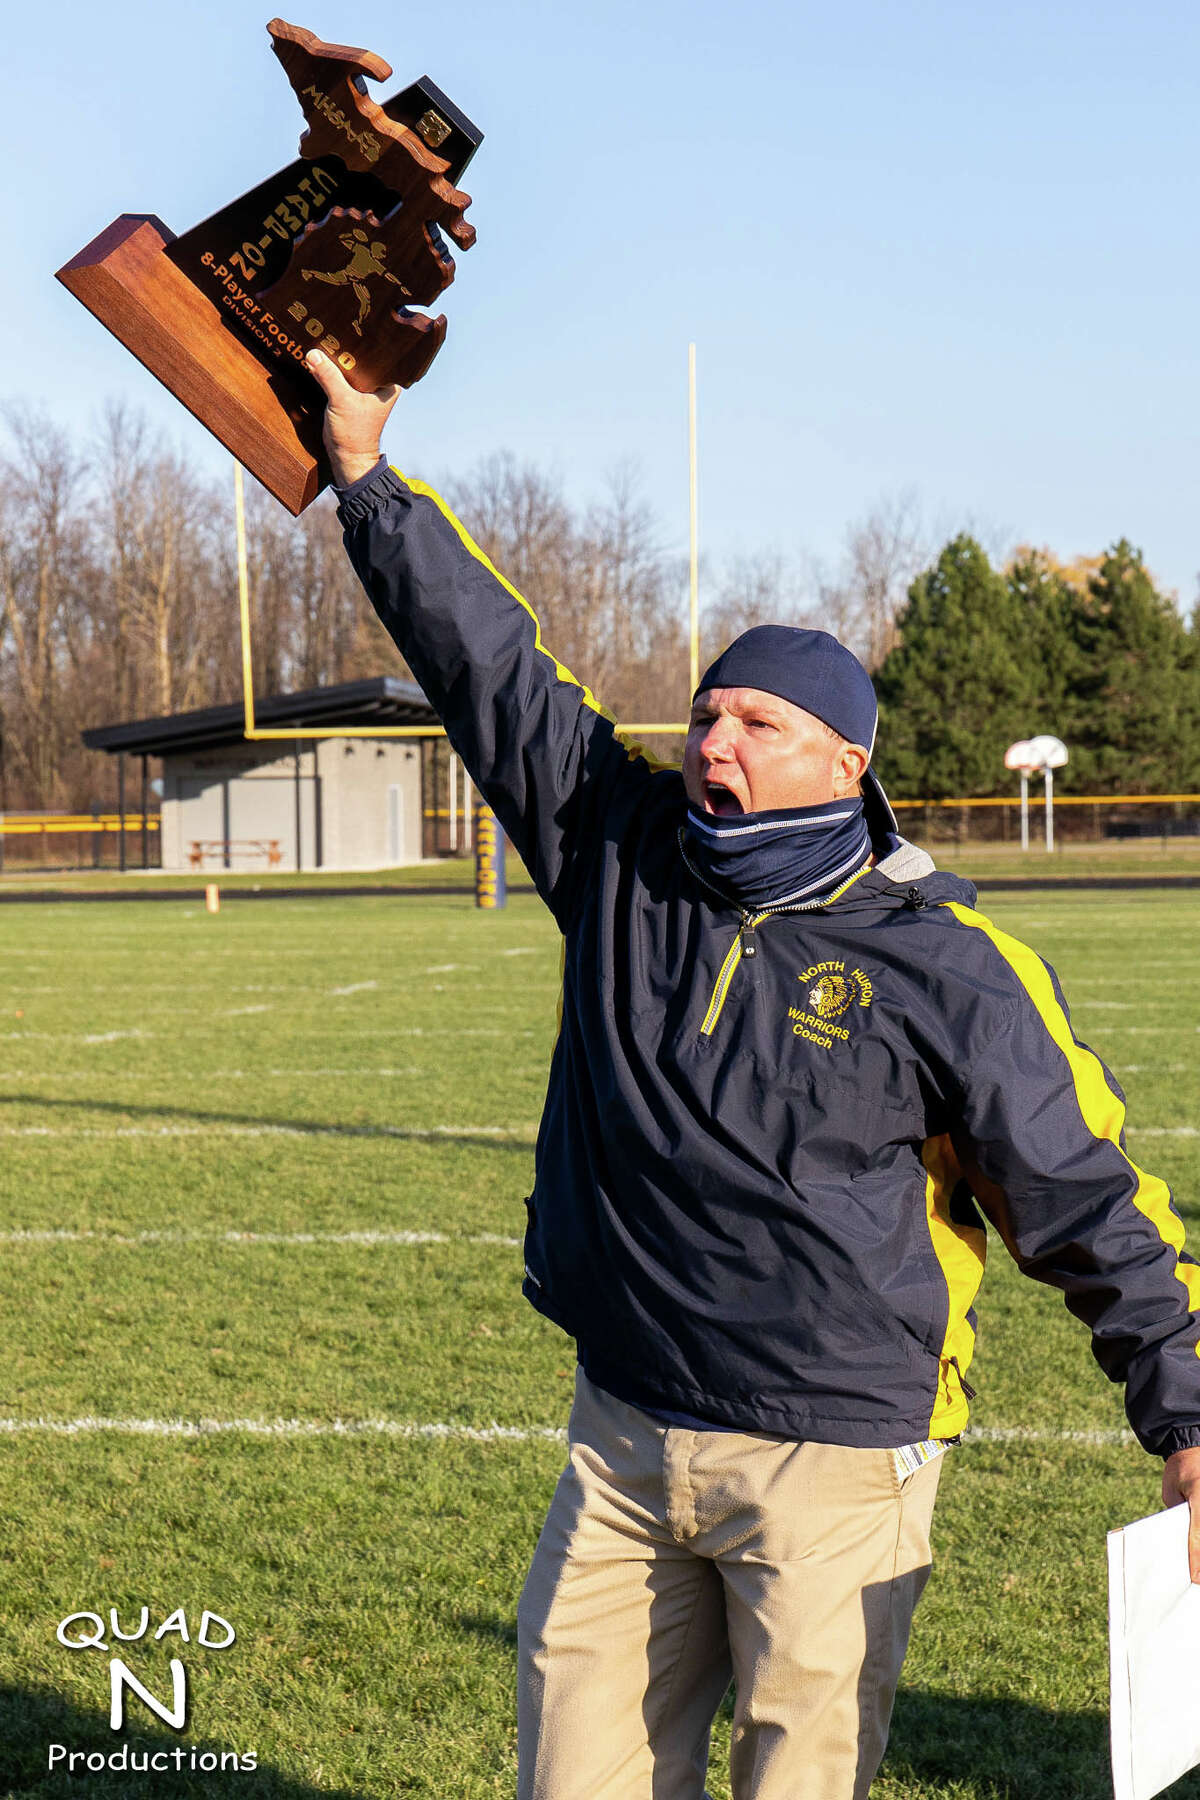 The North Huron varsity football team claimed a 2020 regional championship on Saturday afternoon after defeating Mount Pleasant Sacred Heart, 50-20.